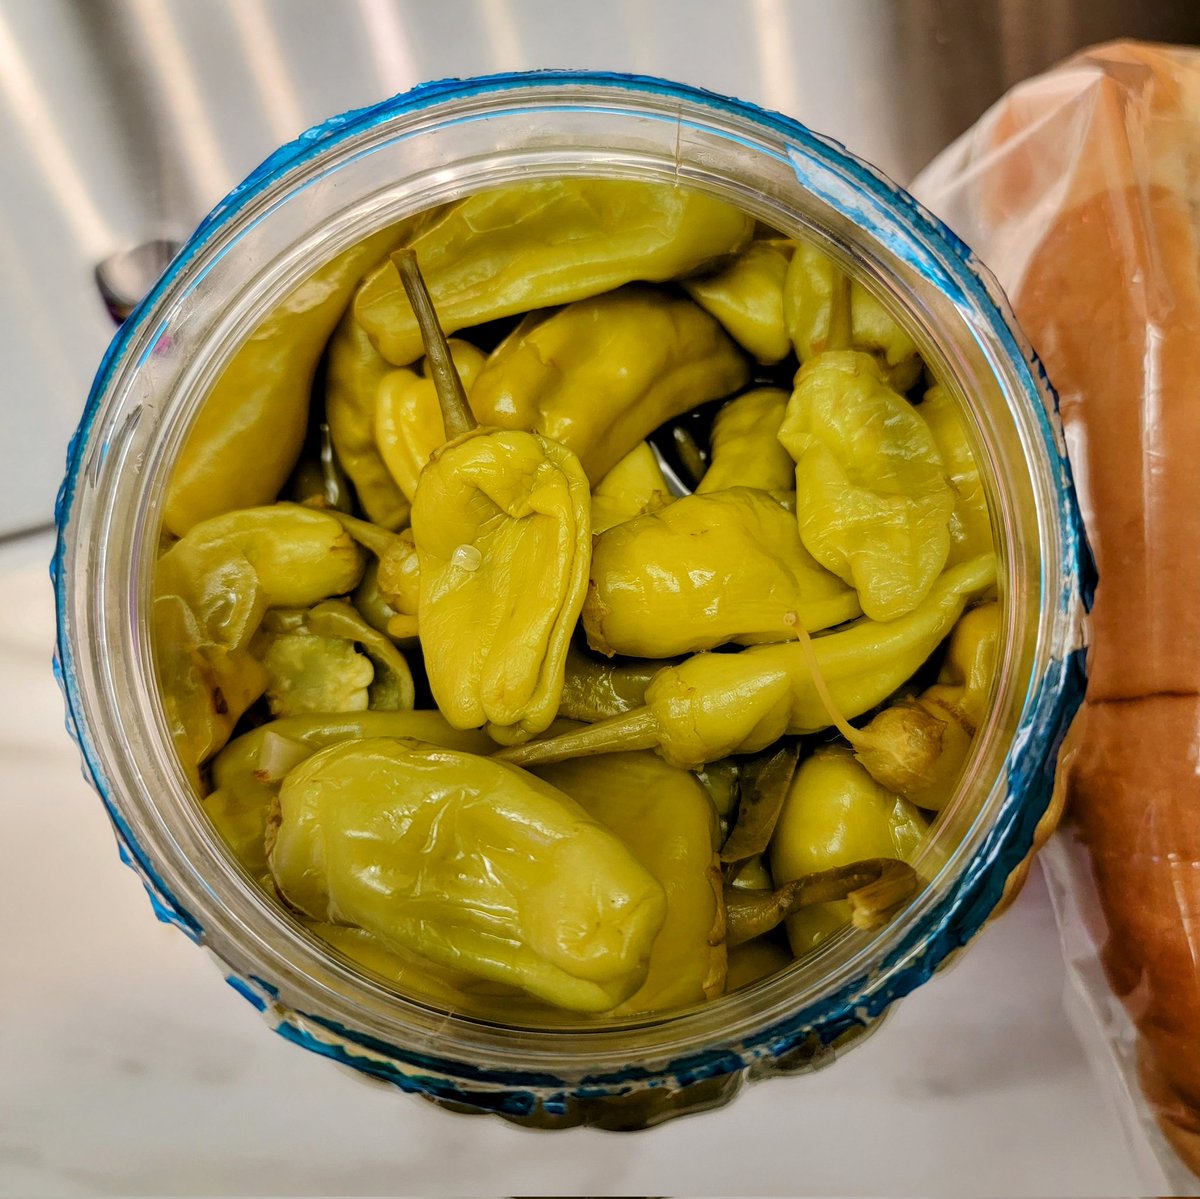 The secret to a great #ItalianSandwich is a big jar of #pepperoncini. If you don't agree with us, then you're wrong and we can't be friends.